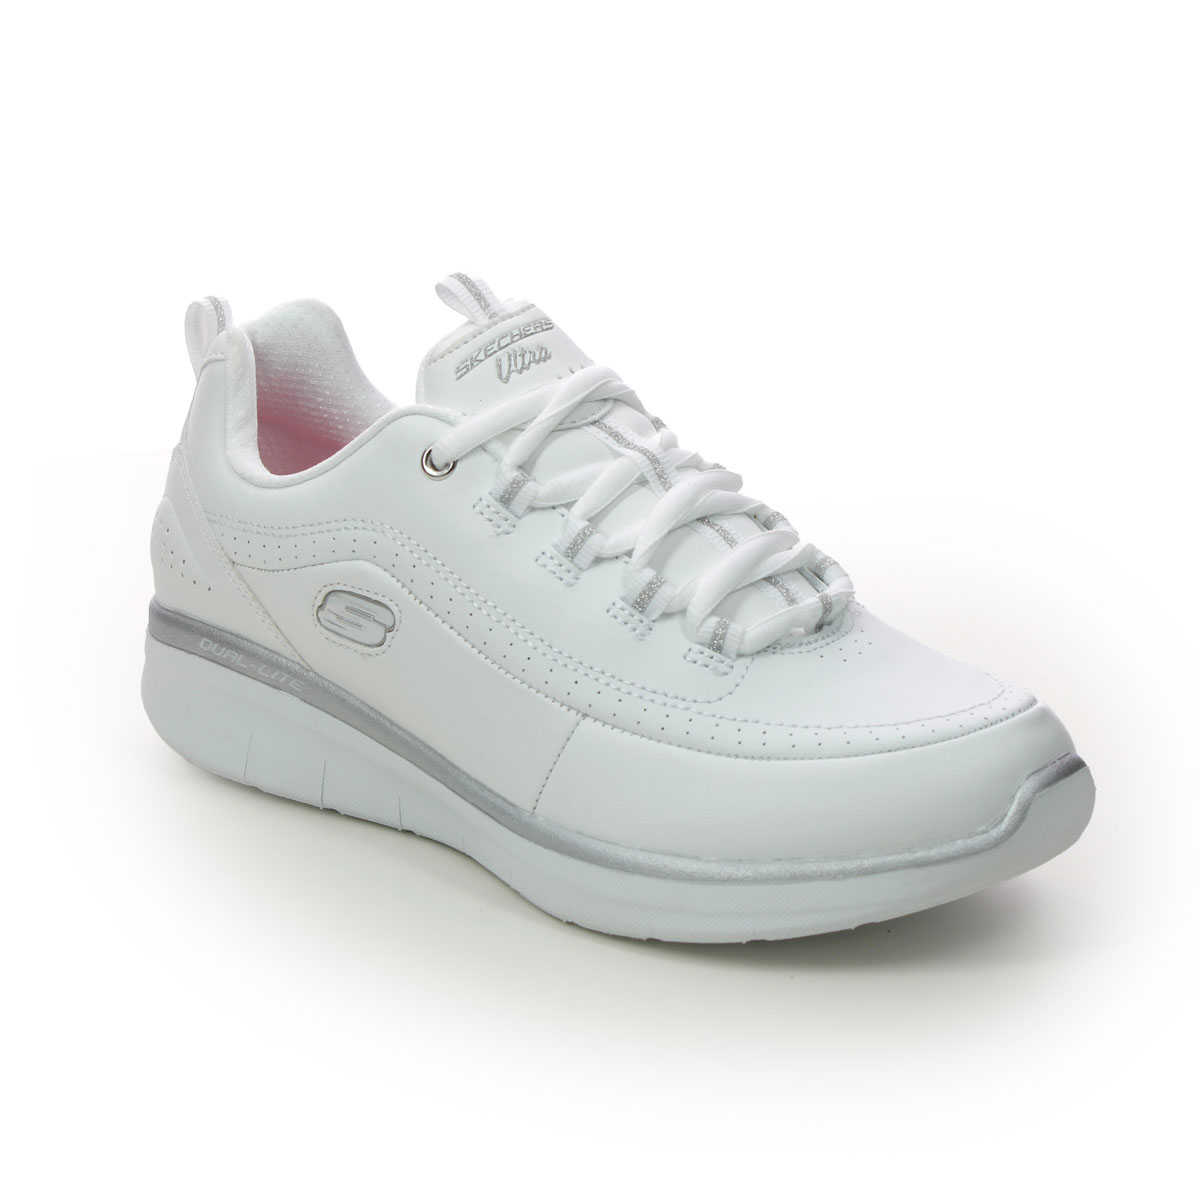 Skechers Synergy 2.0 WSL White Silver Womens trainers 12363 in a Plain Leather in Size 8